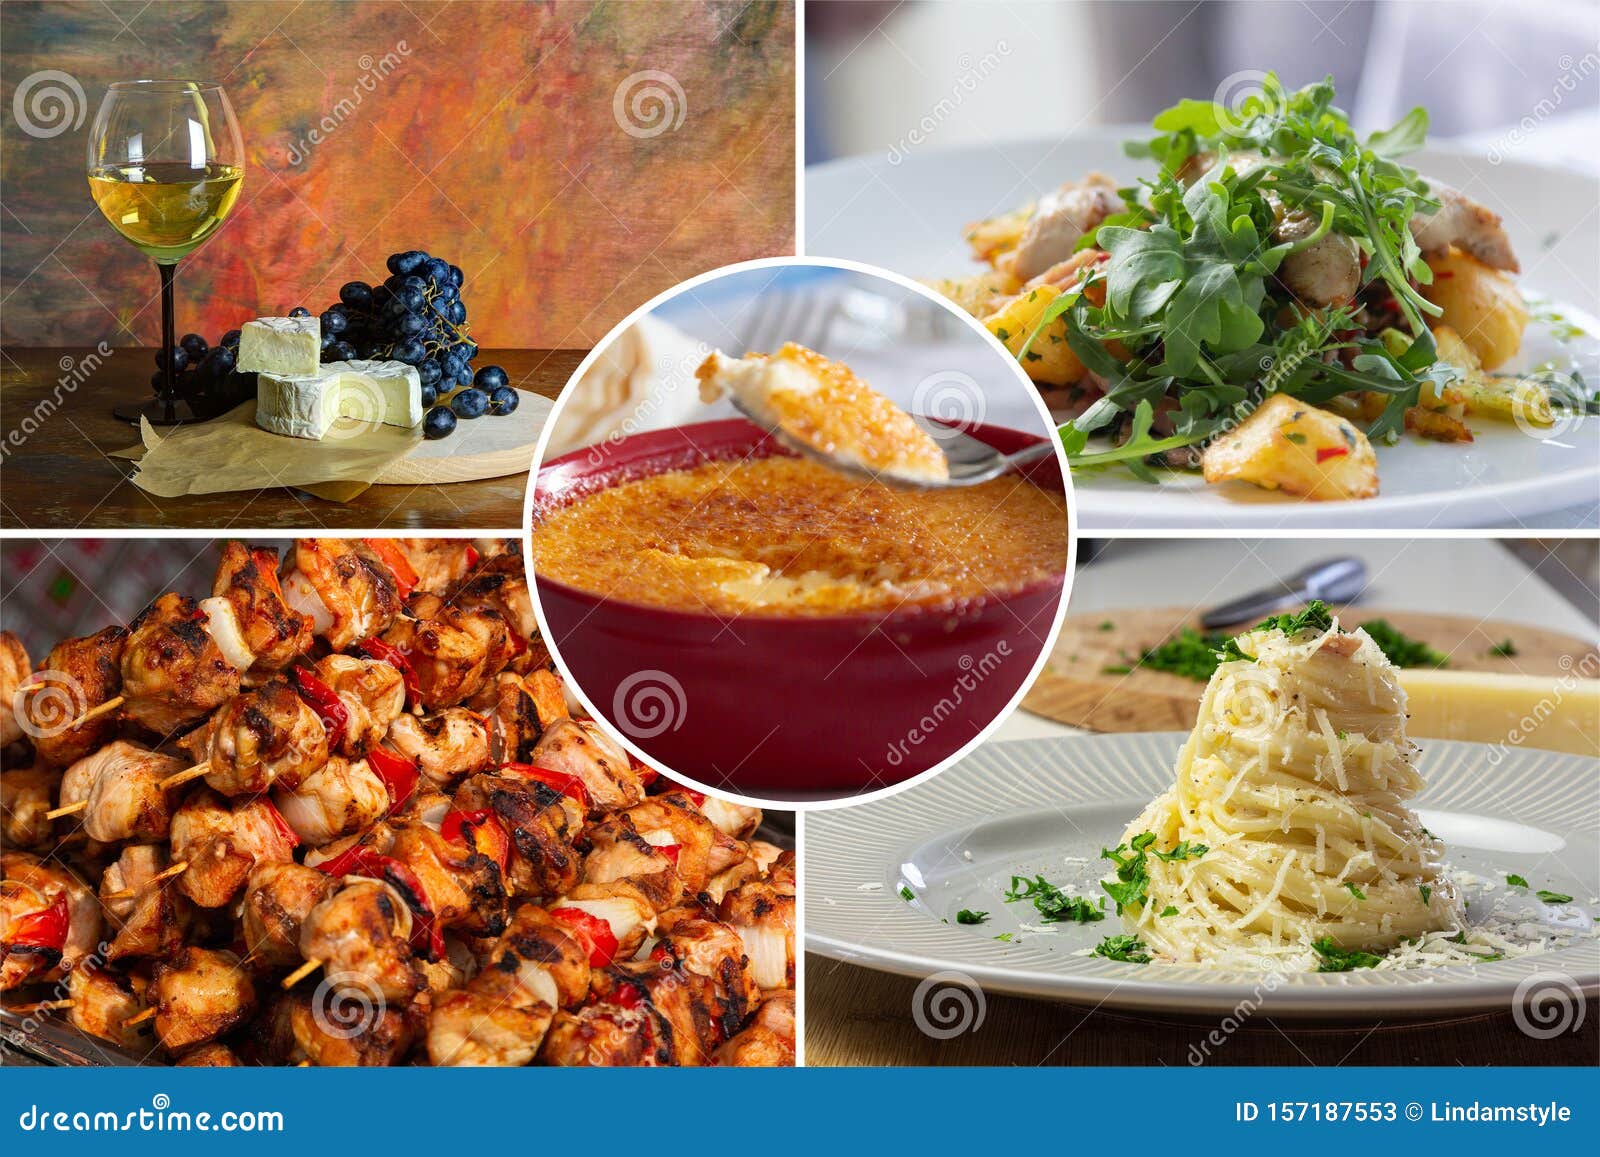 Food collage stock image. Image of cheer, cooking, cuisine - 157187553